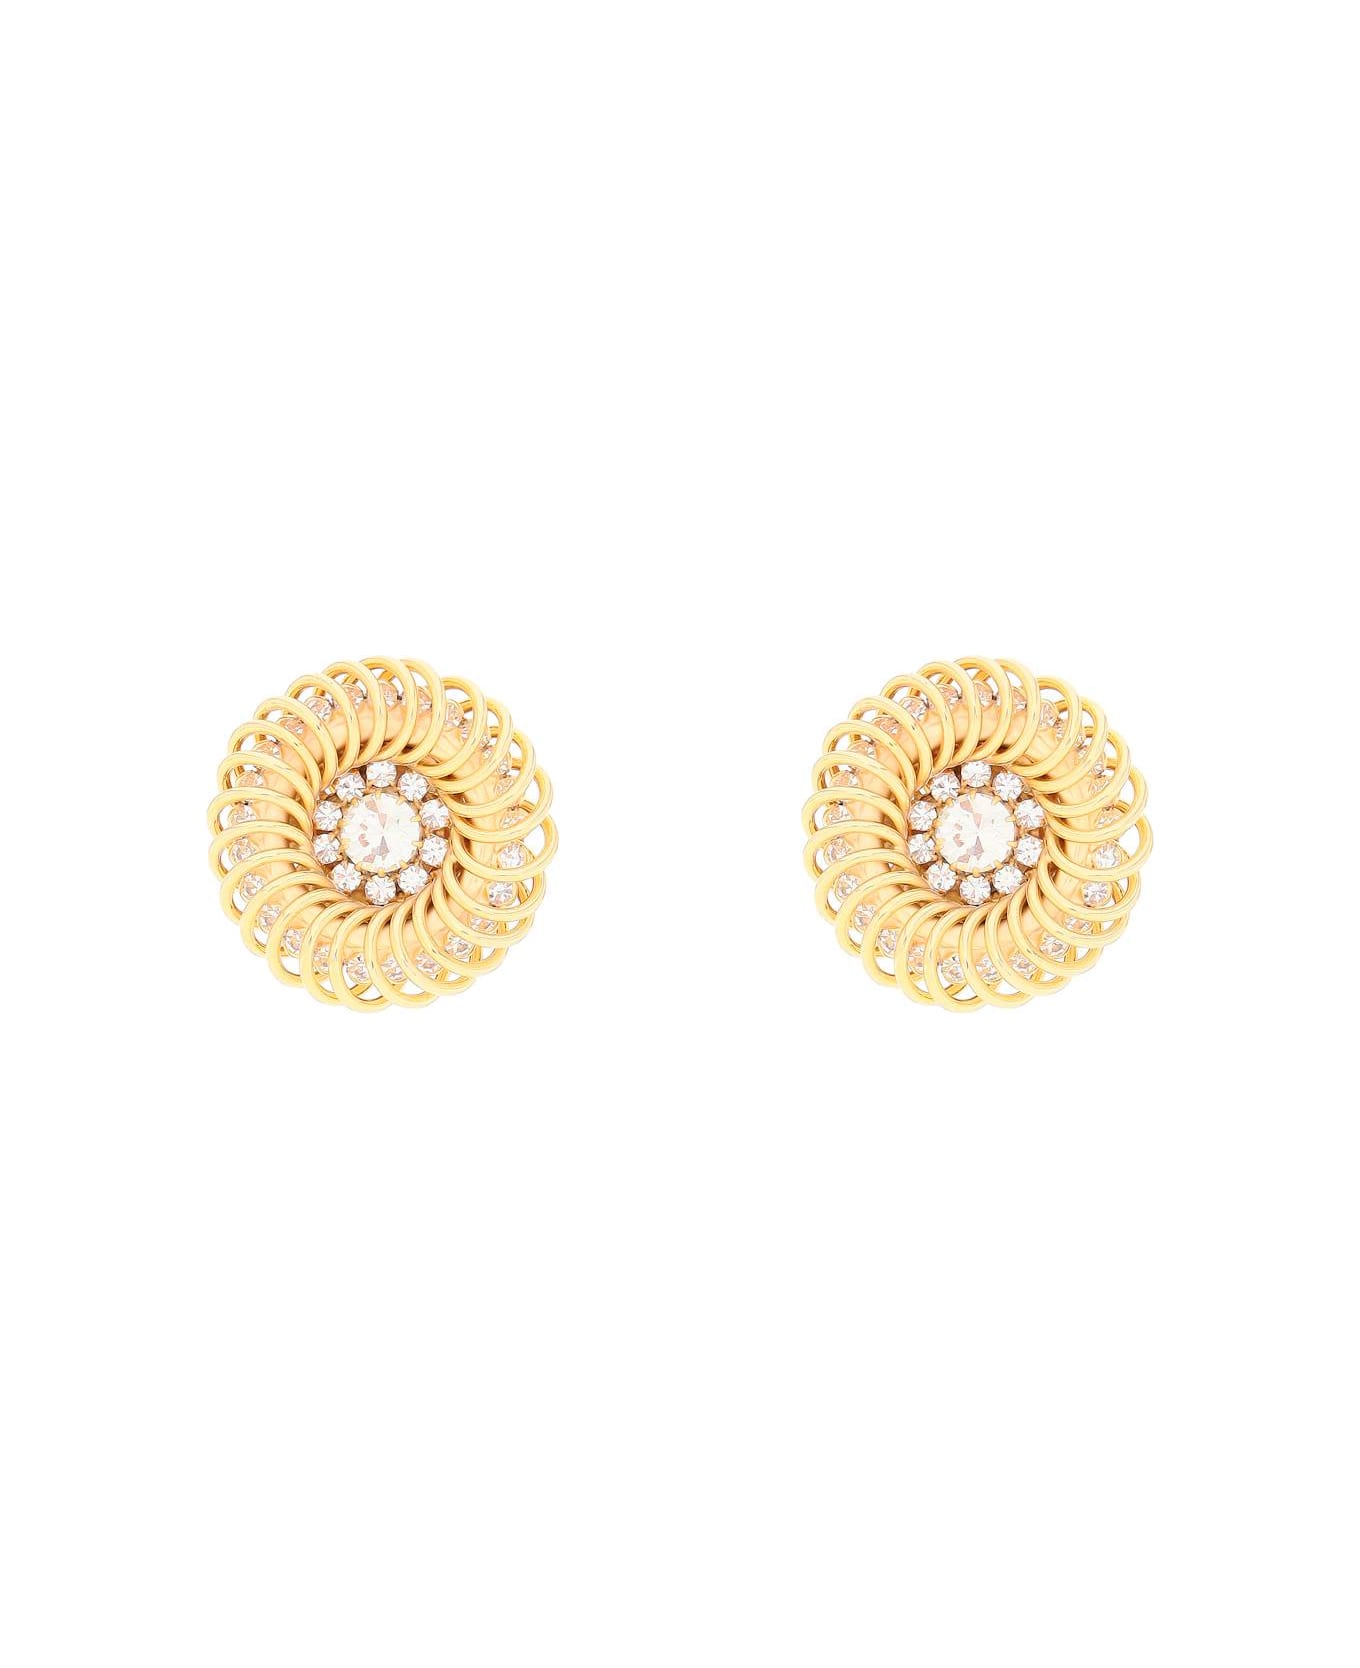 Alessandra Rich Spiral Earrings - CRY GOLD (Gold)